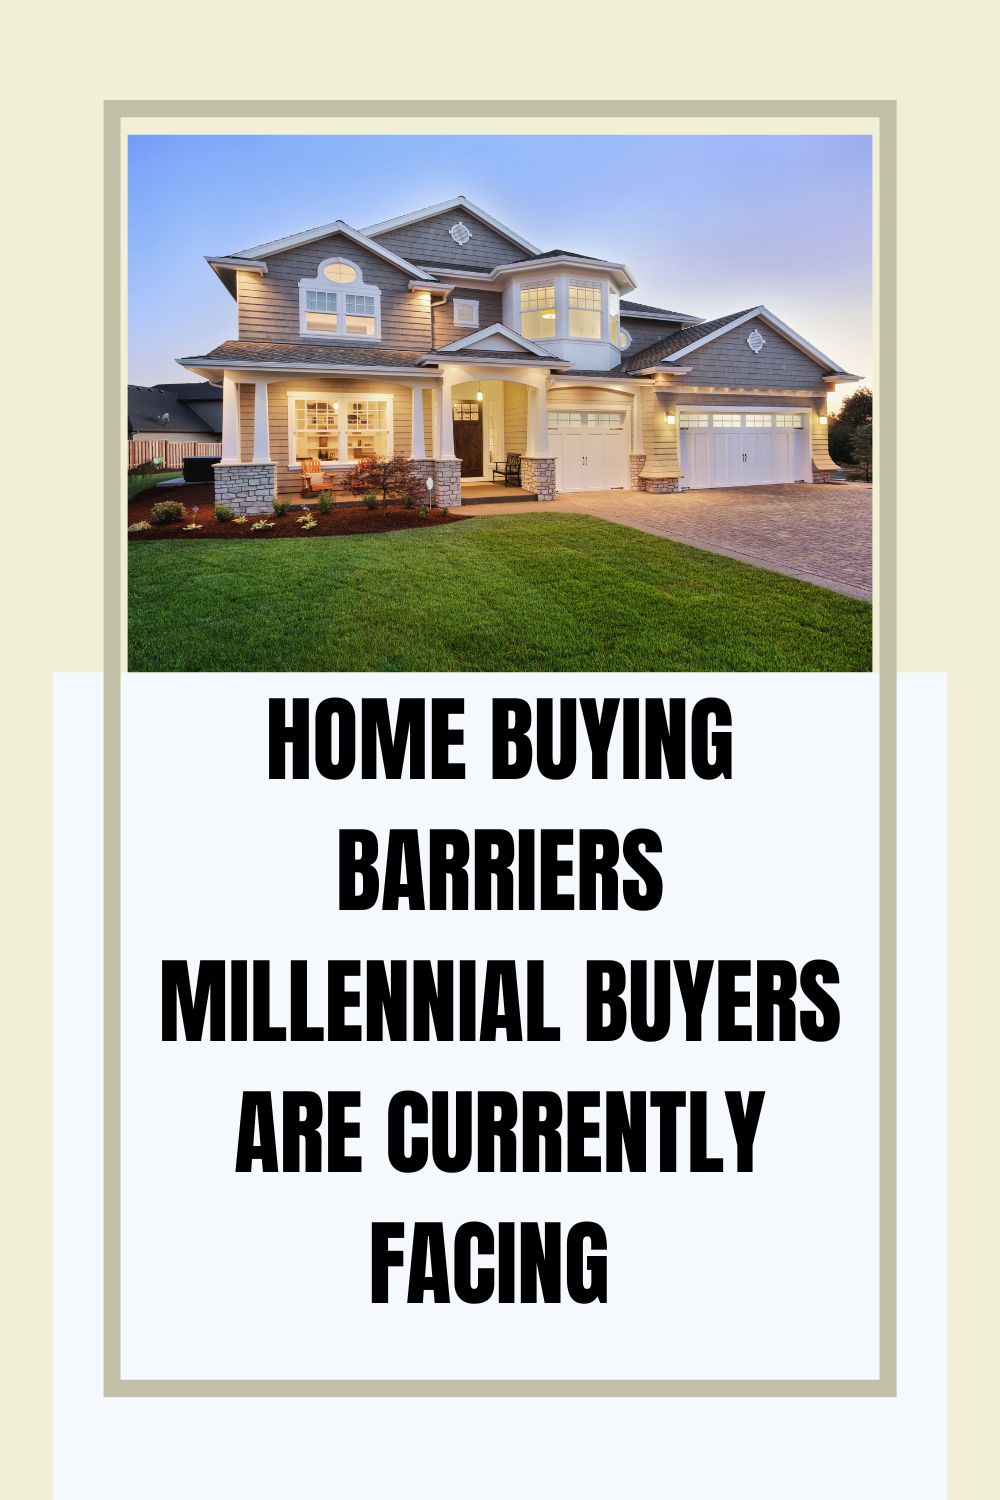 Home Buying Barriers Millennial Buyers are Currently Facing